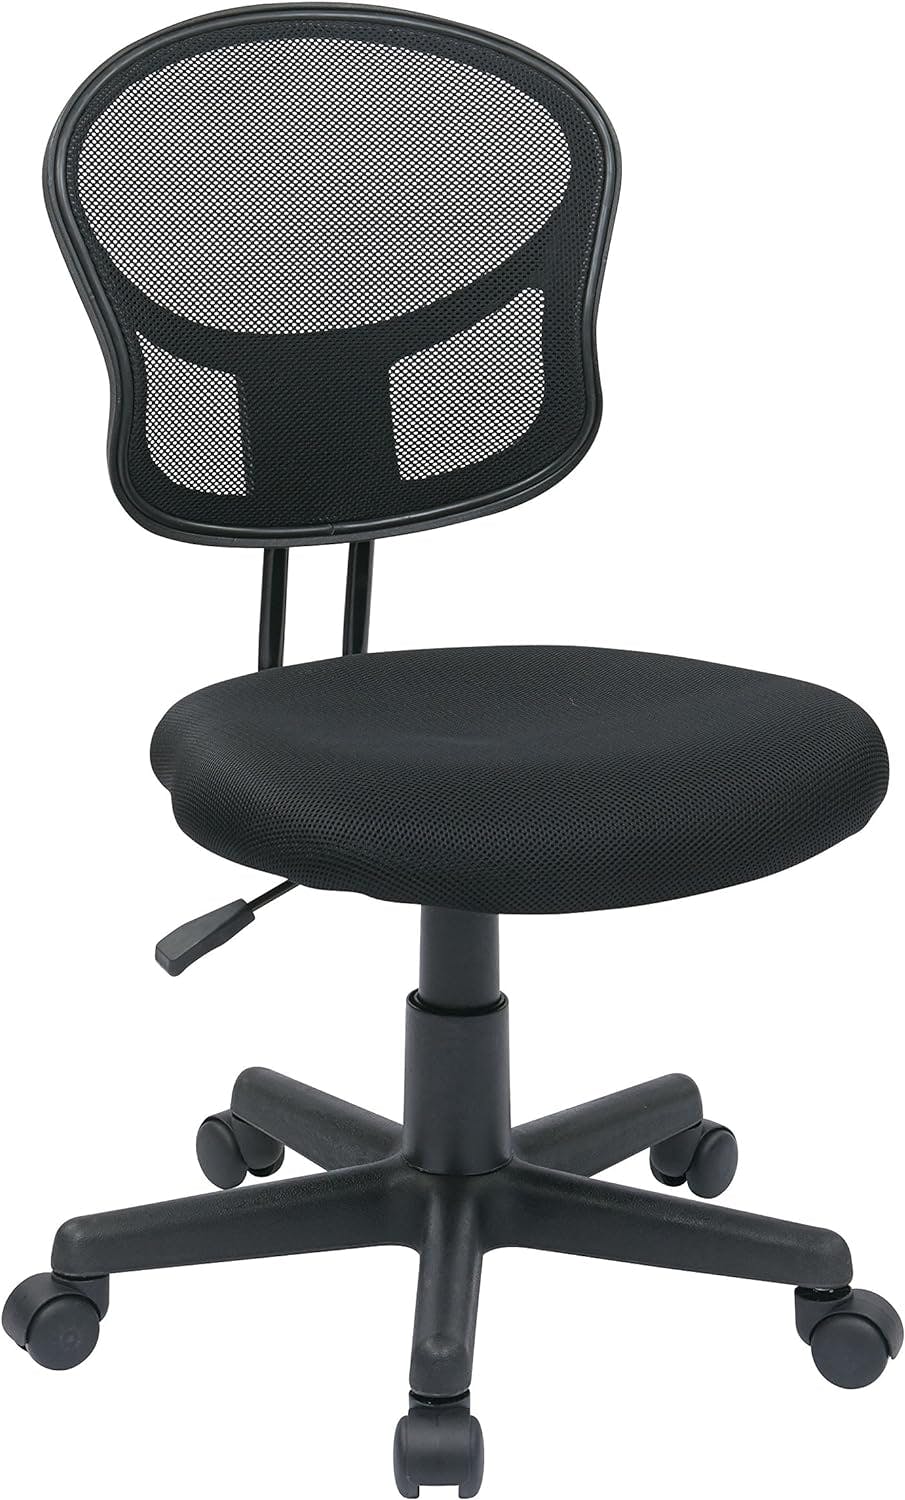 360 Swivel Armless Task Chair in Black Mesh with Wood Accents